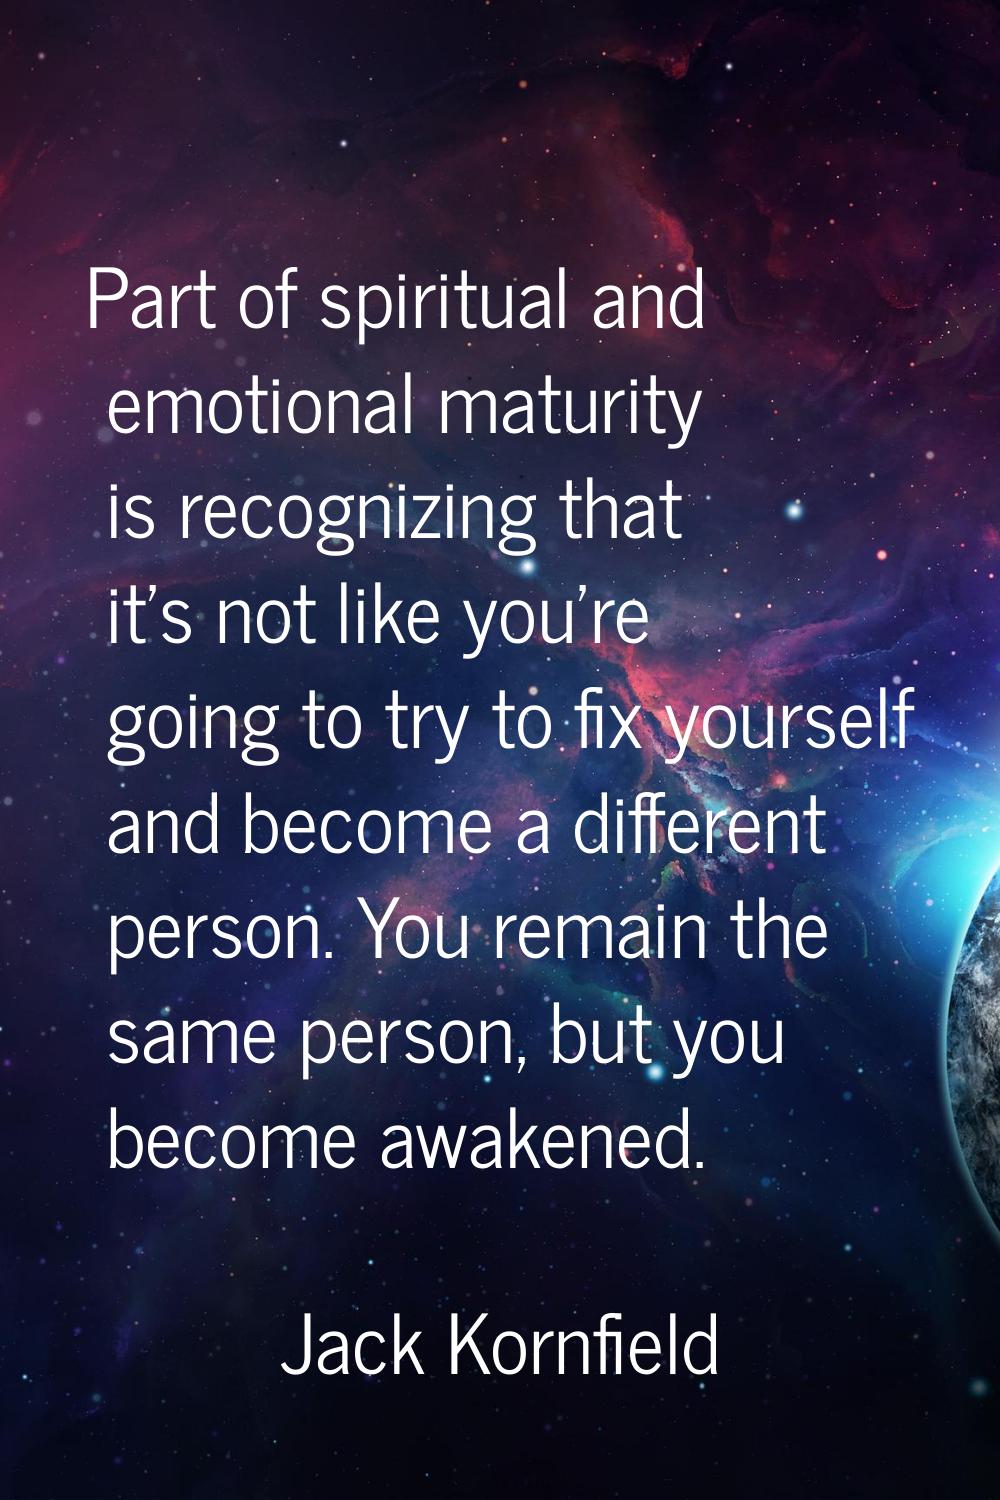 Part of spiritual and emotional maturity is recognizing that it's not like you're going to try to f